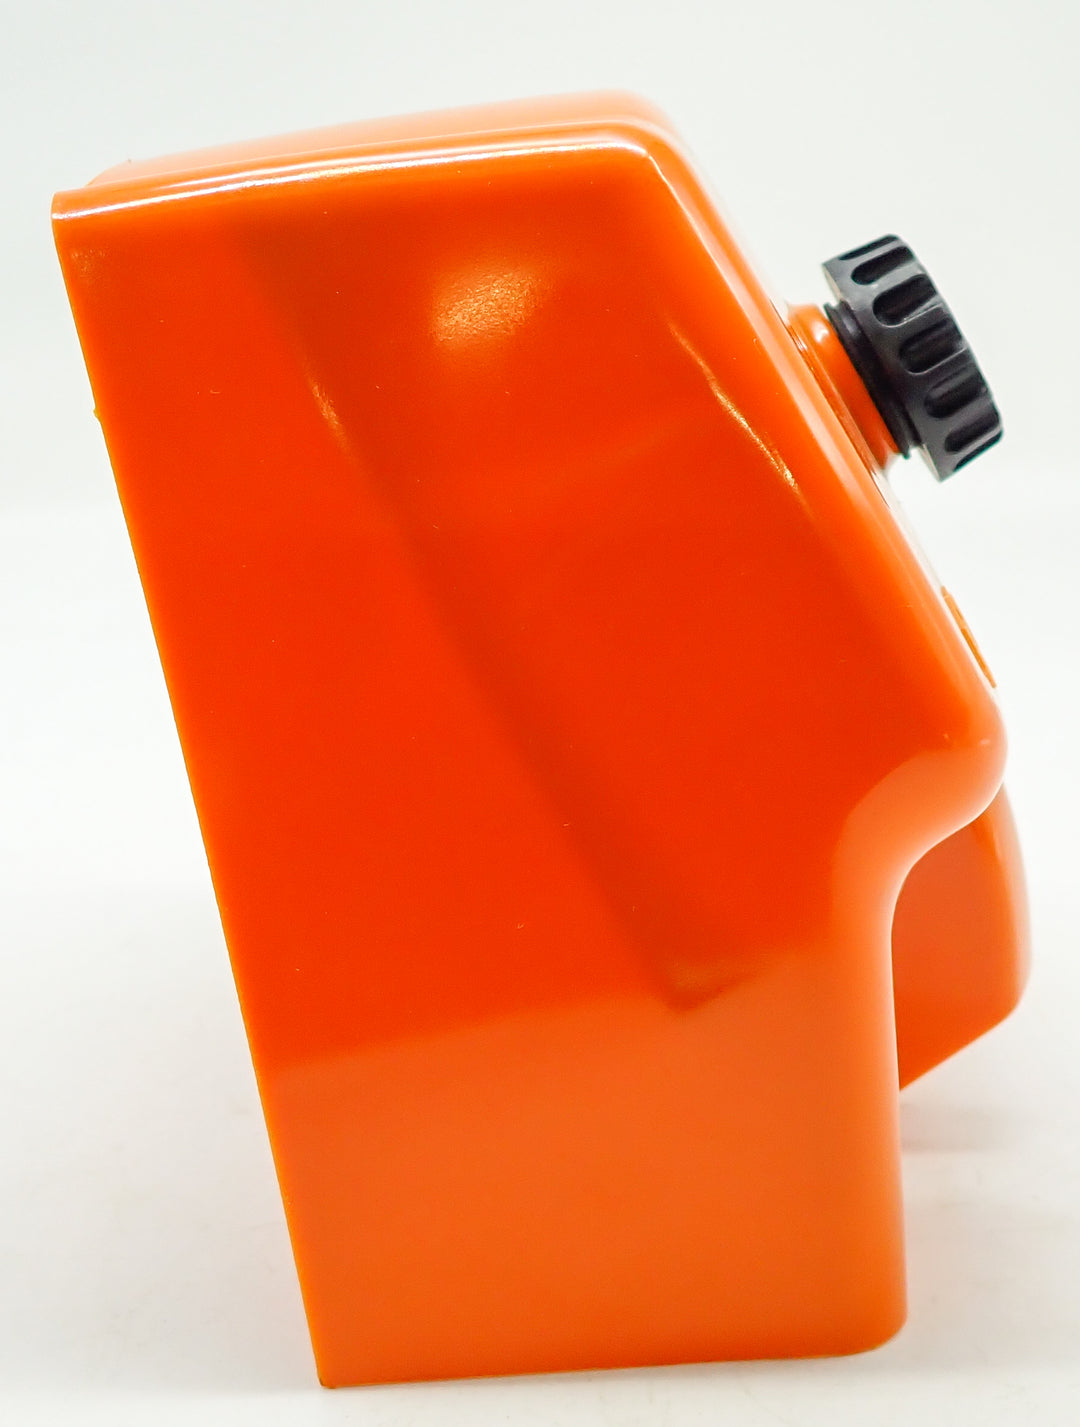 THE DUKE'S AIR FILTER COVER FITS STIHL 066 MS660